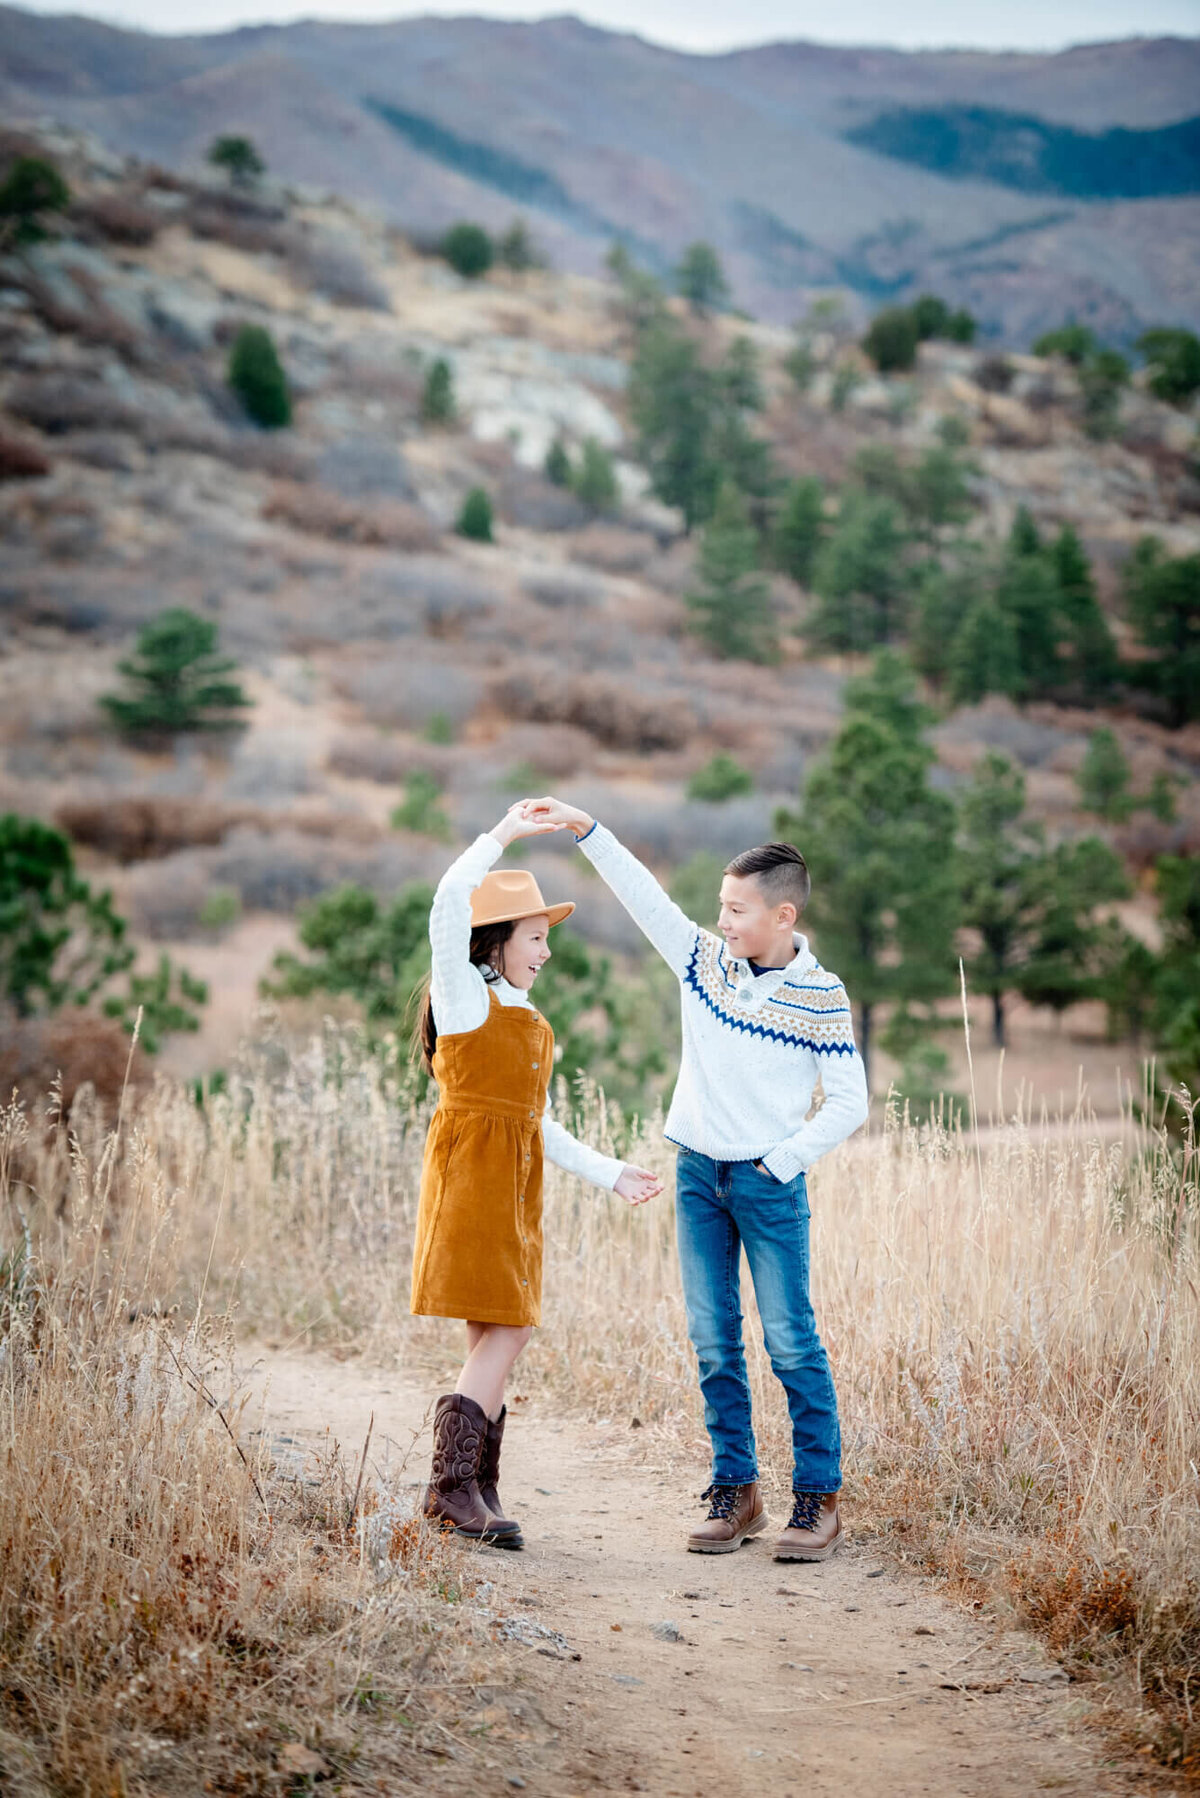 An image captured by a Colorado Springs family photographer of a young boy spinning his younger sister by the hand on a trail